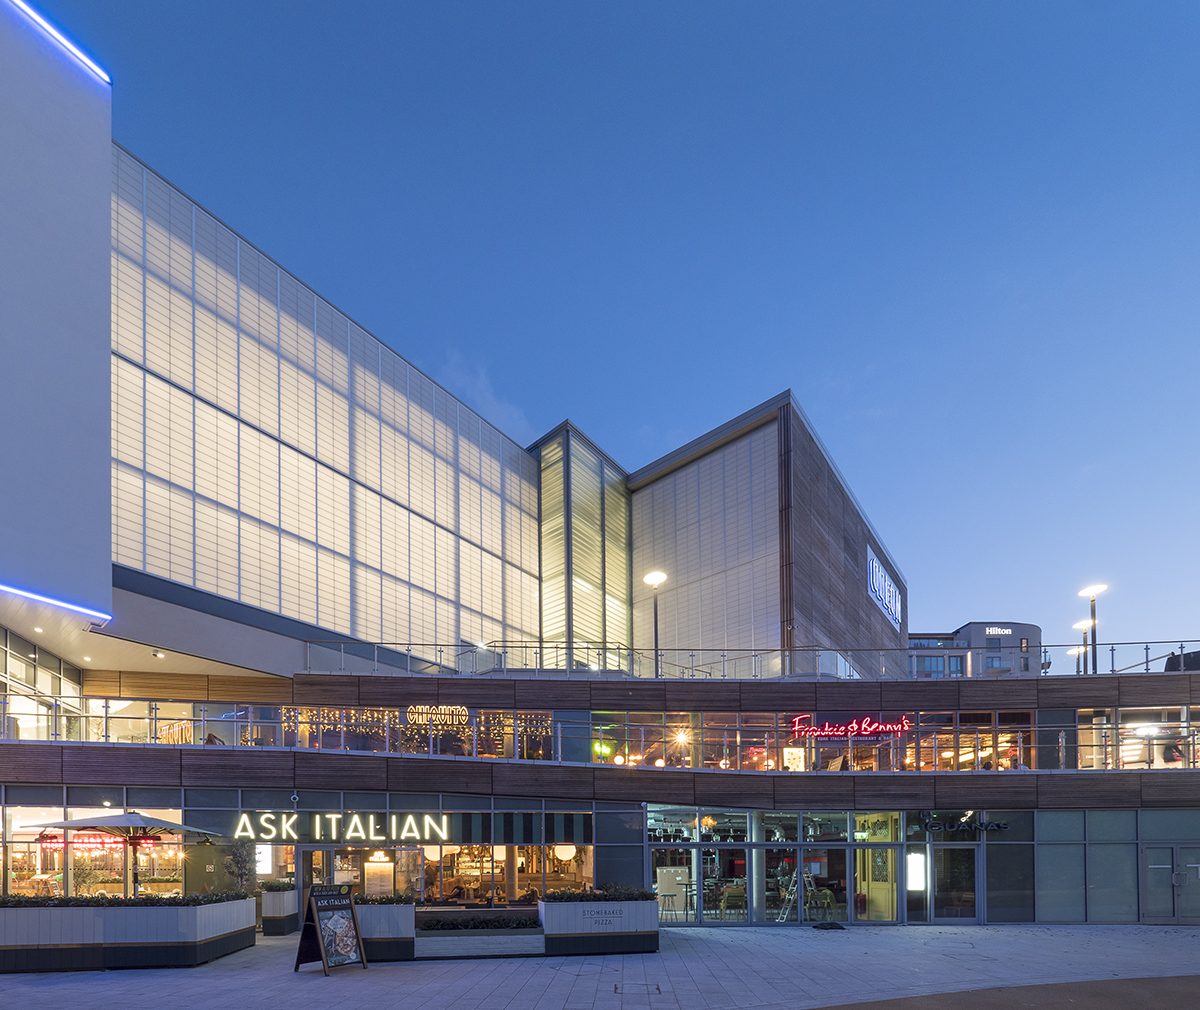 Exterior shot of Odeon Theatre in Bournemouth, United Kingdom, featuring a backlit Kalwall facade